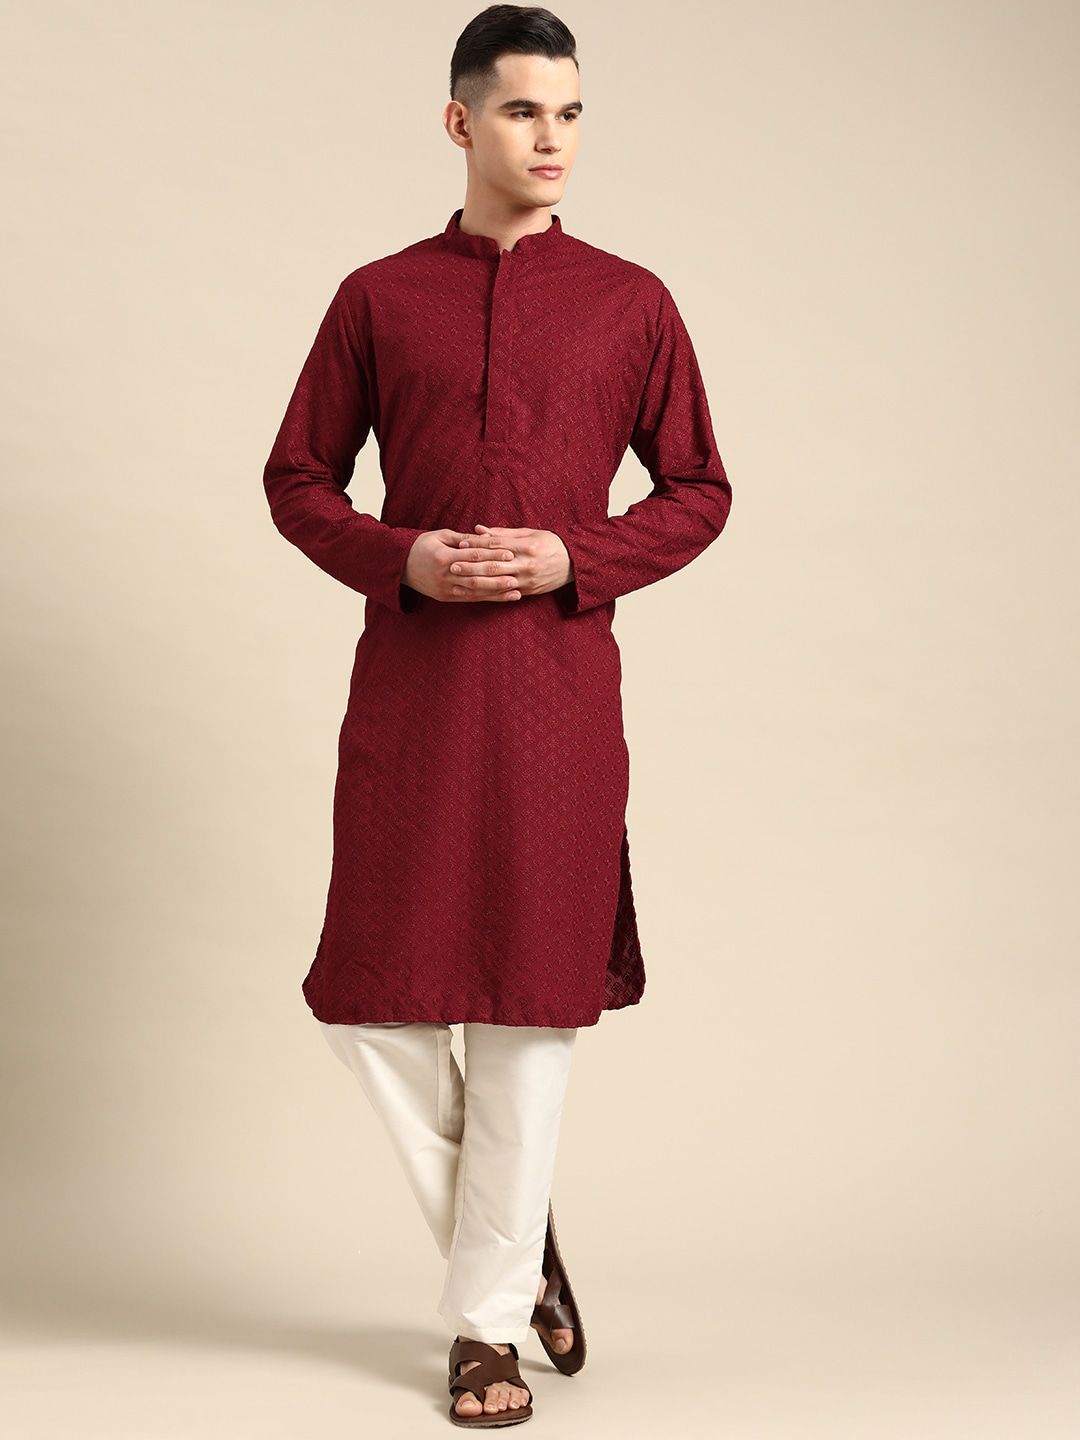 Buy SLKS Pathani Suit for Mens, Solid Cotton Pathani Suit with Two Pockets  (Beige, 36) at Amazon.in